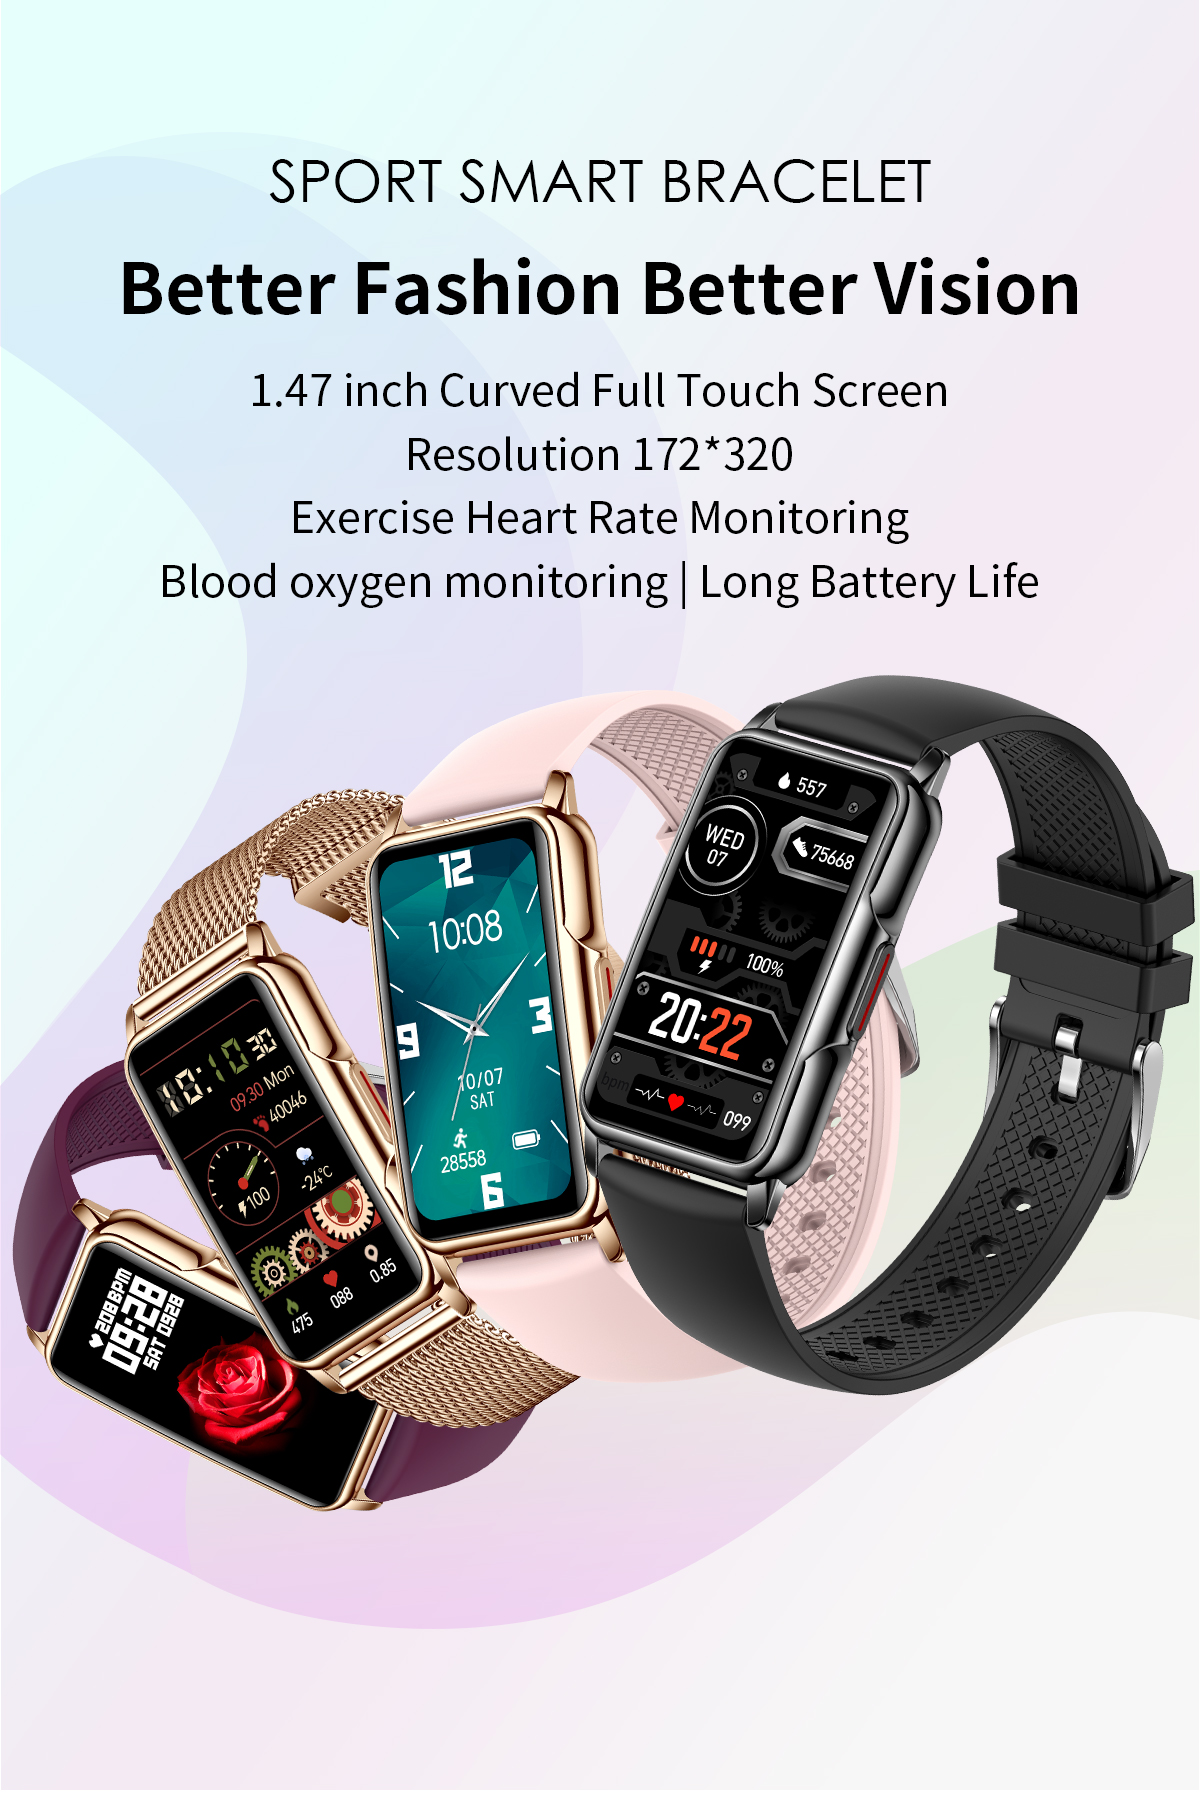 H80 Female Smart Watch | Sport Smart Bracelet | 1.47 Inch Curved Full Touch Screen | Exercise Heart Monitoring | Blood Oxygen Monitoring